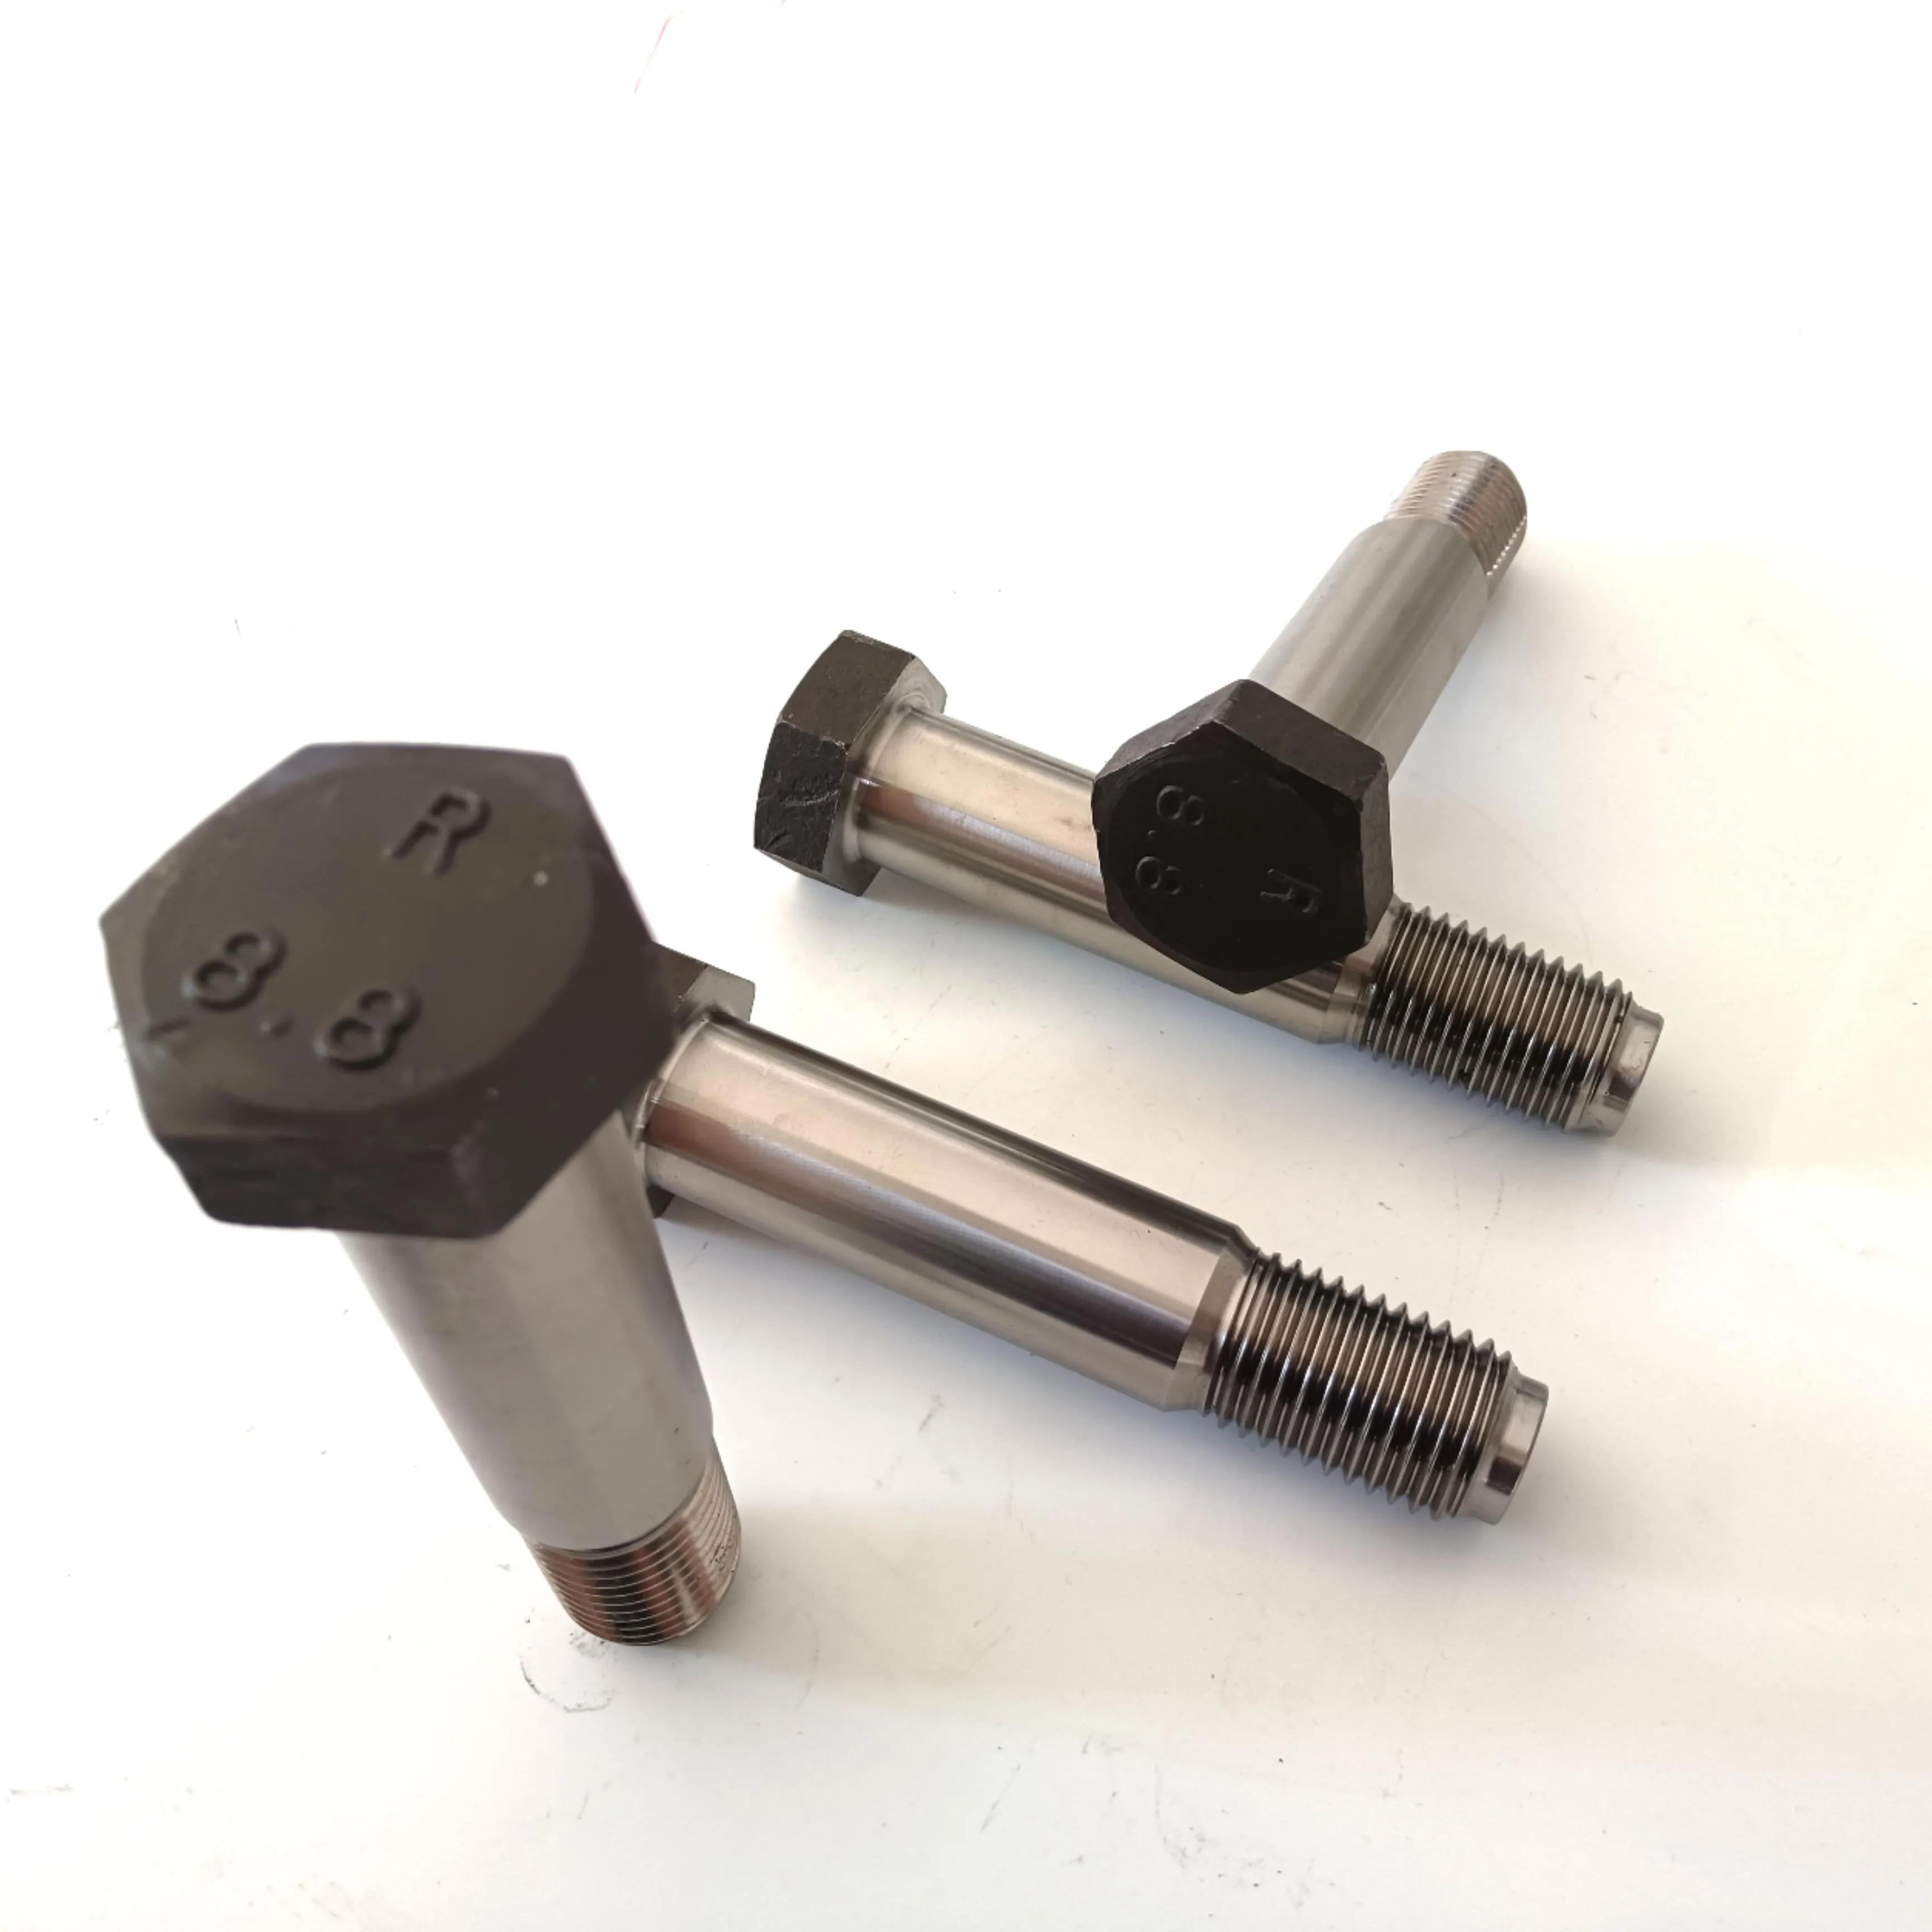 Factory Price Customized bolts DIN610 Grade 8.8 10.9 hex head reamer bolt Hexagon fitted bolts with short threaded dog point